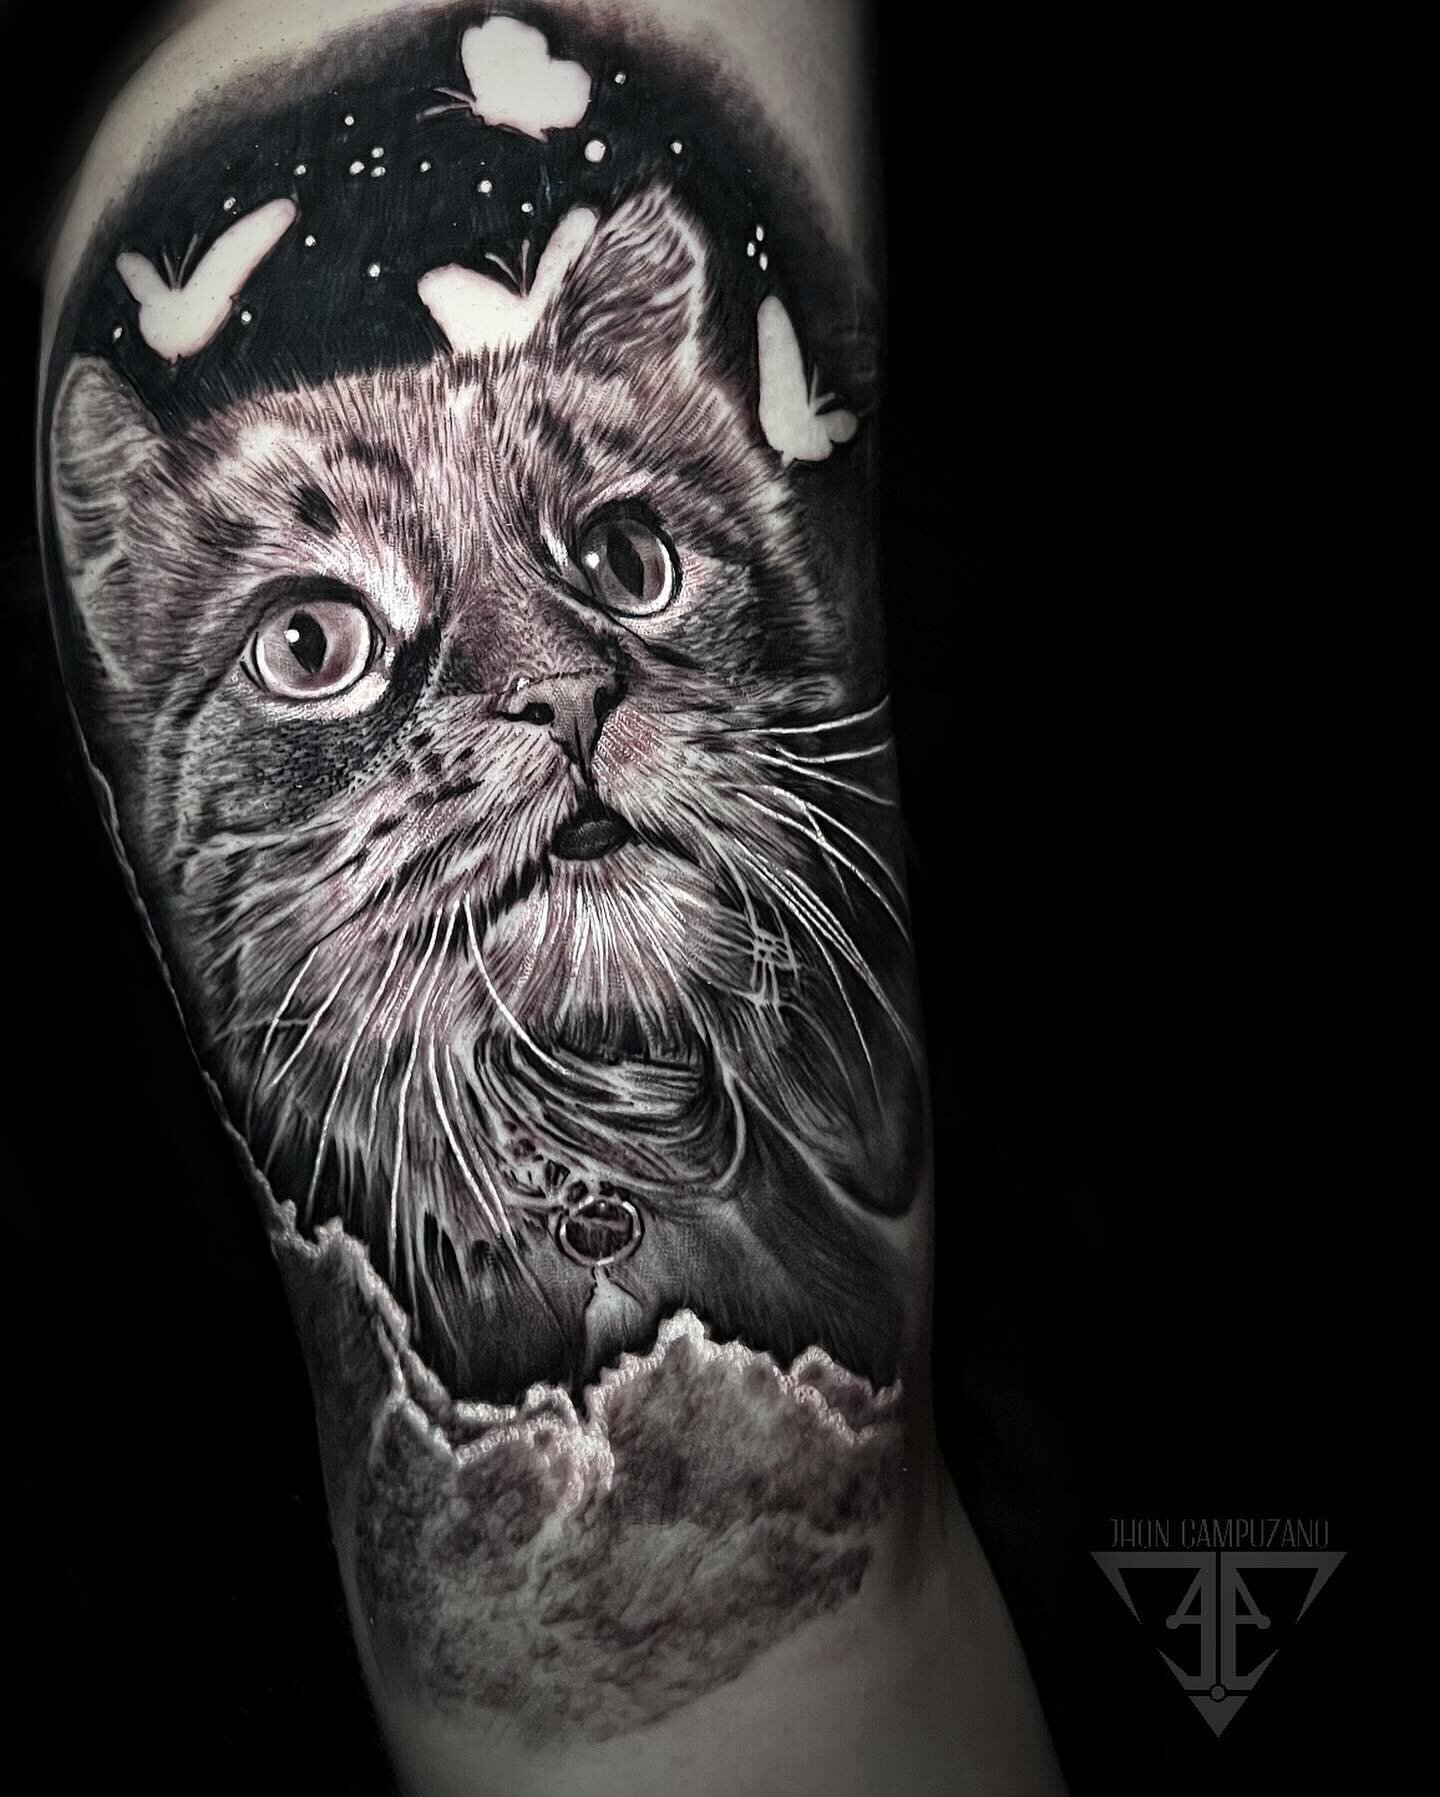 Tattoo done by @Jhoncampuzanotattoo 

Stunning cat tattoo portrait that mirrors the beauty and grace of your beloved feline friend. Honored to have brought this furry love story to life on your body. #catattoo #portraitart #tattooartist#bufordga #suw